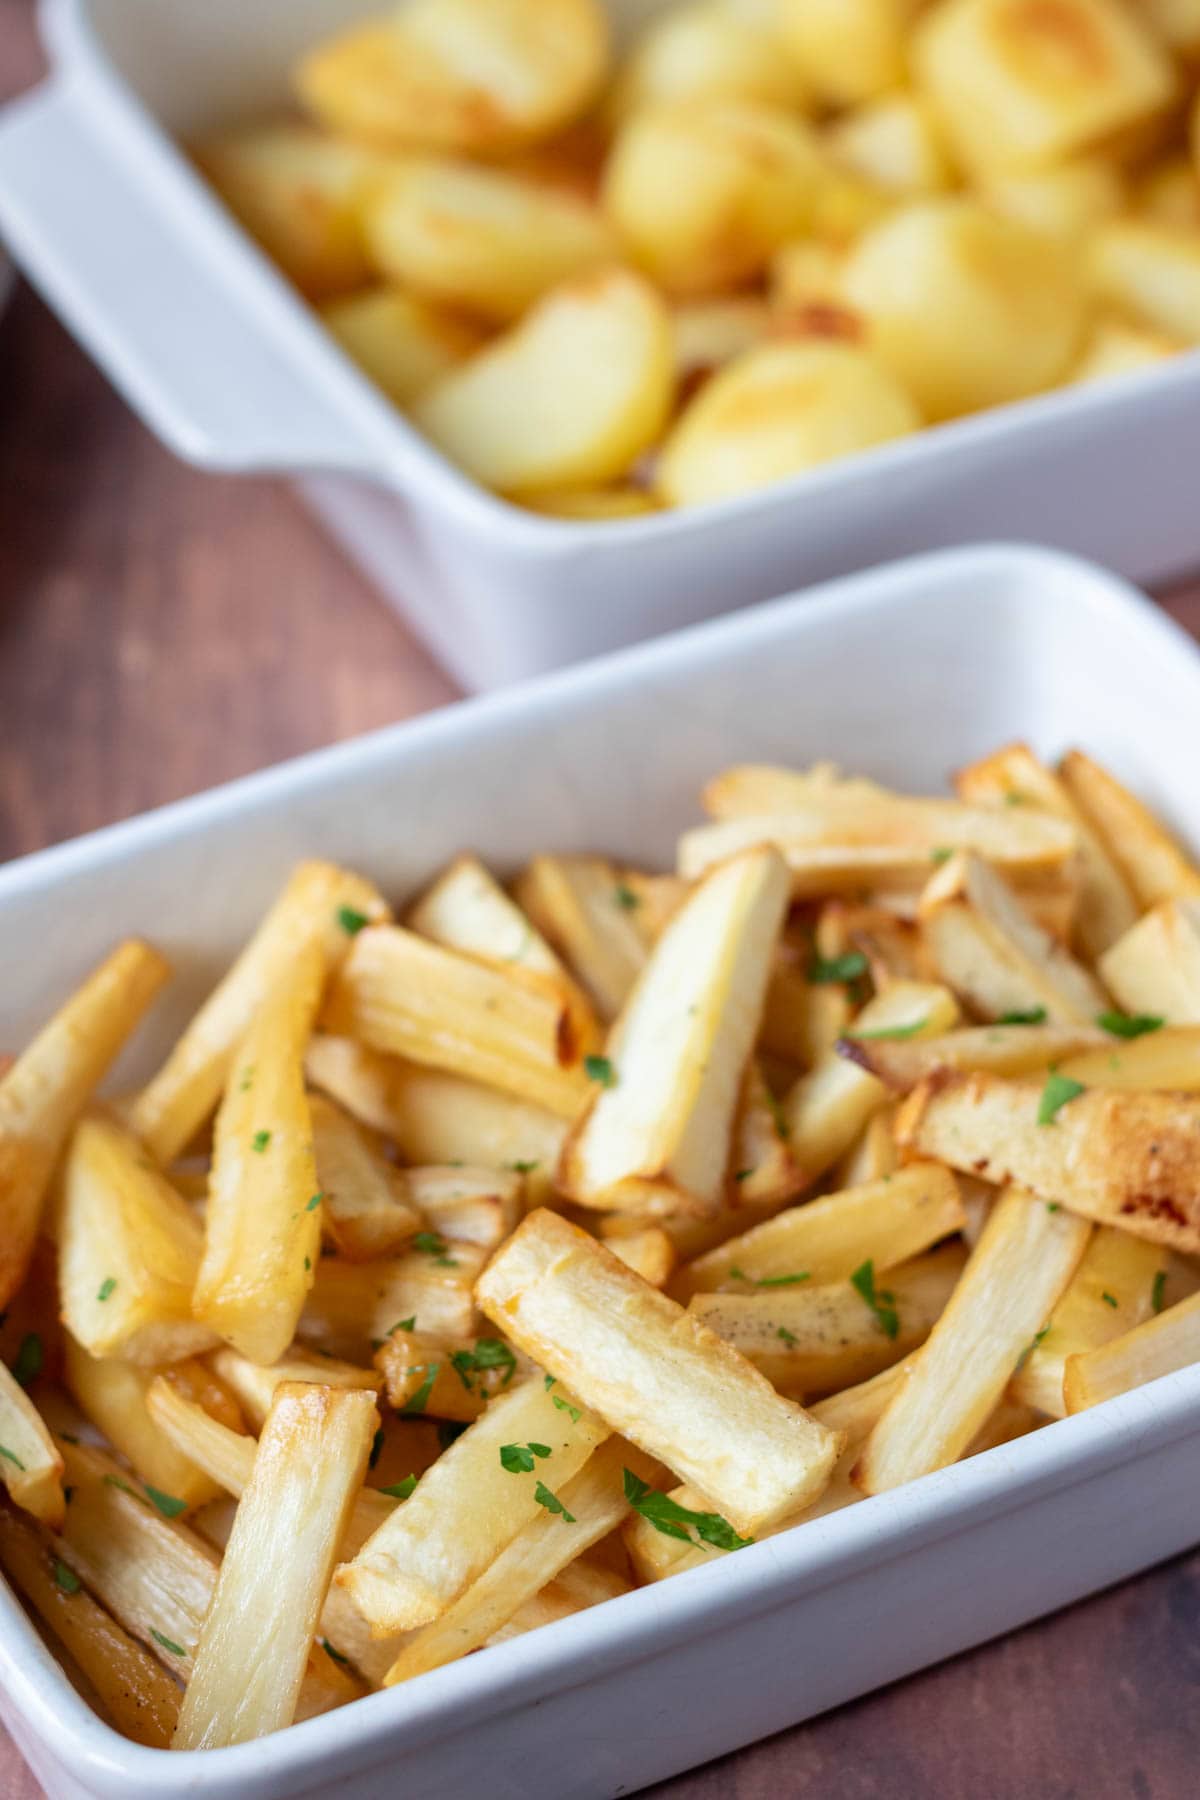 Roasted honey glazed parsnips in a serving dish with a dish of roast potatoes behind.